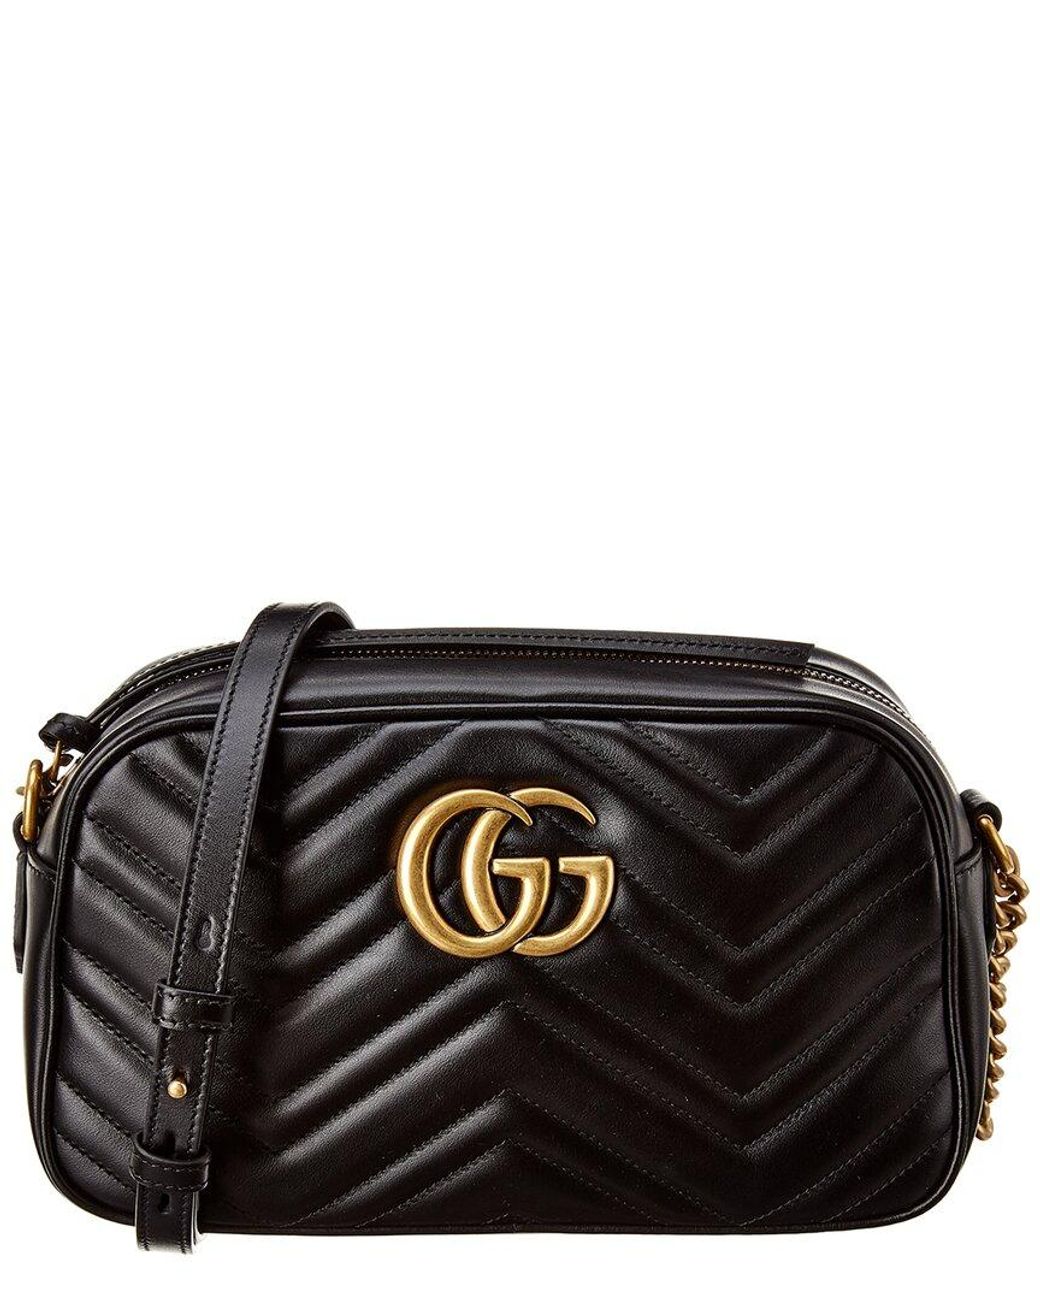 Gucci GG Marmont Camera Bag Matelasse Small Black in Leather with